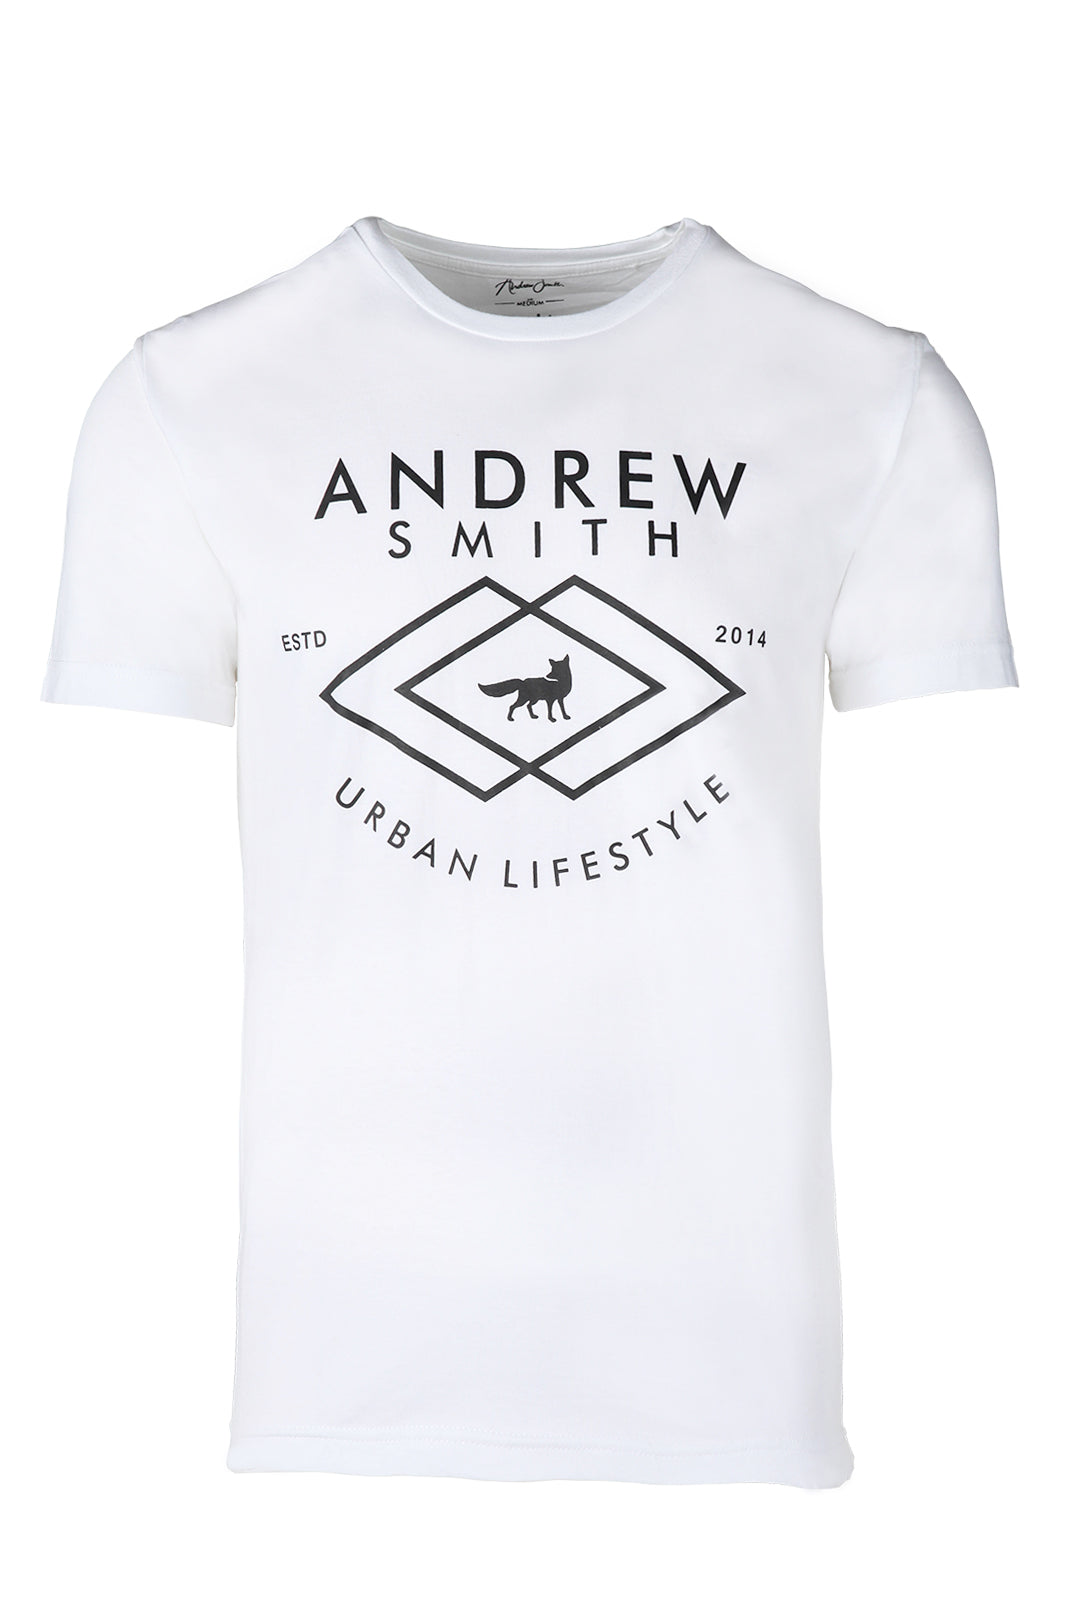 Andrew Smith T-Shirt Slim Fit Pria A0102X08A